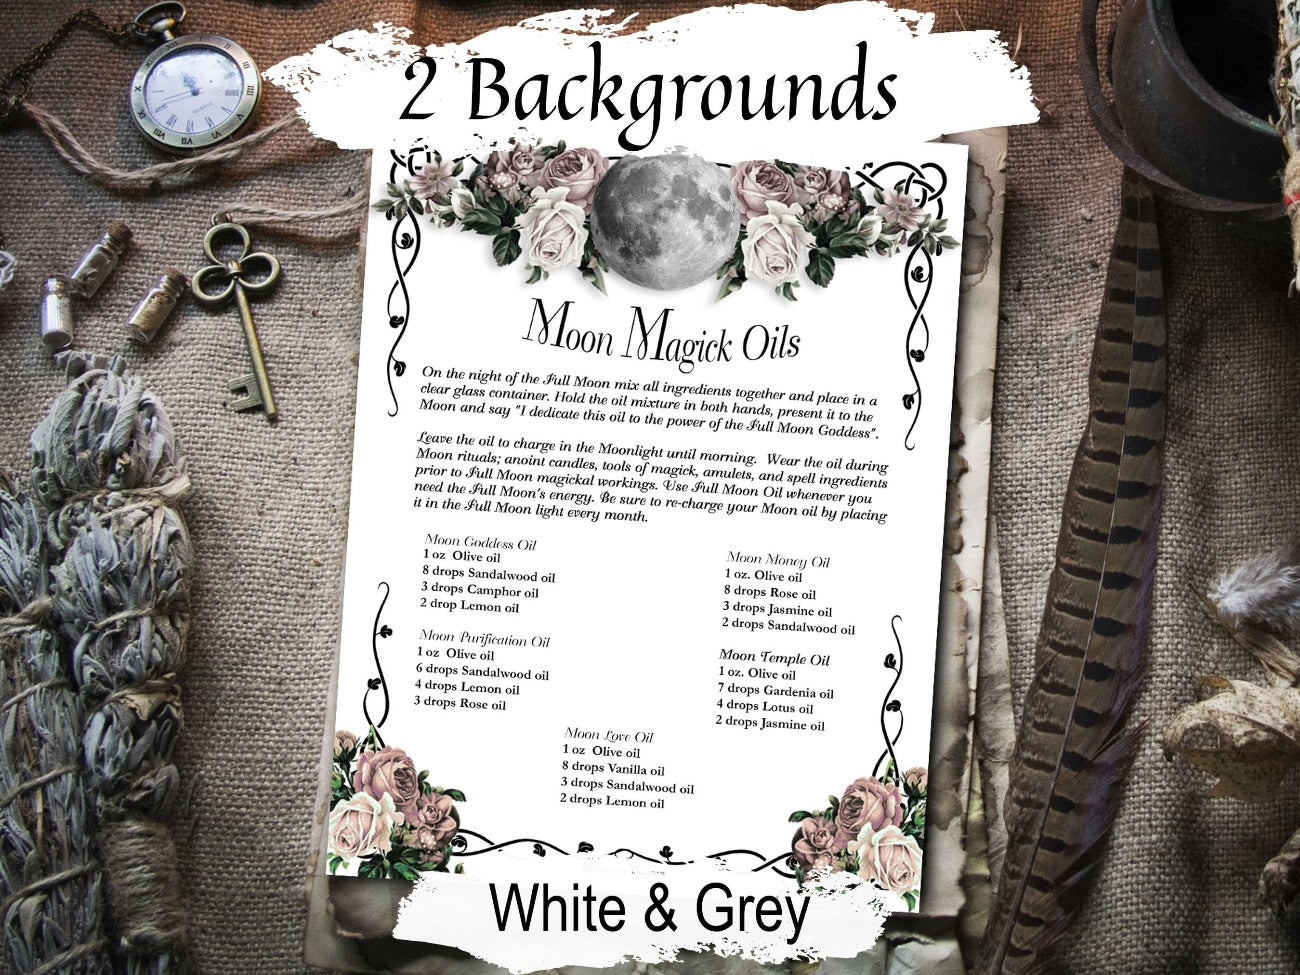 FULL MOON OIL Recipes, Lunar Magick Moon Goddess Oils, Wicca Moon Phase Aromatherapy to Draw Down the Moon, Moon Phase Essential Oil - Morgana Magick Spell